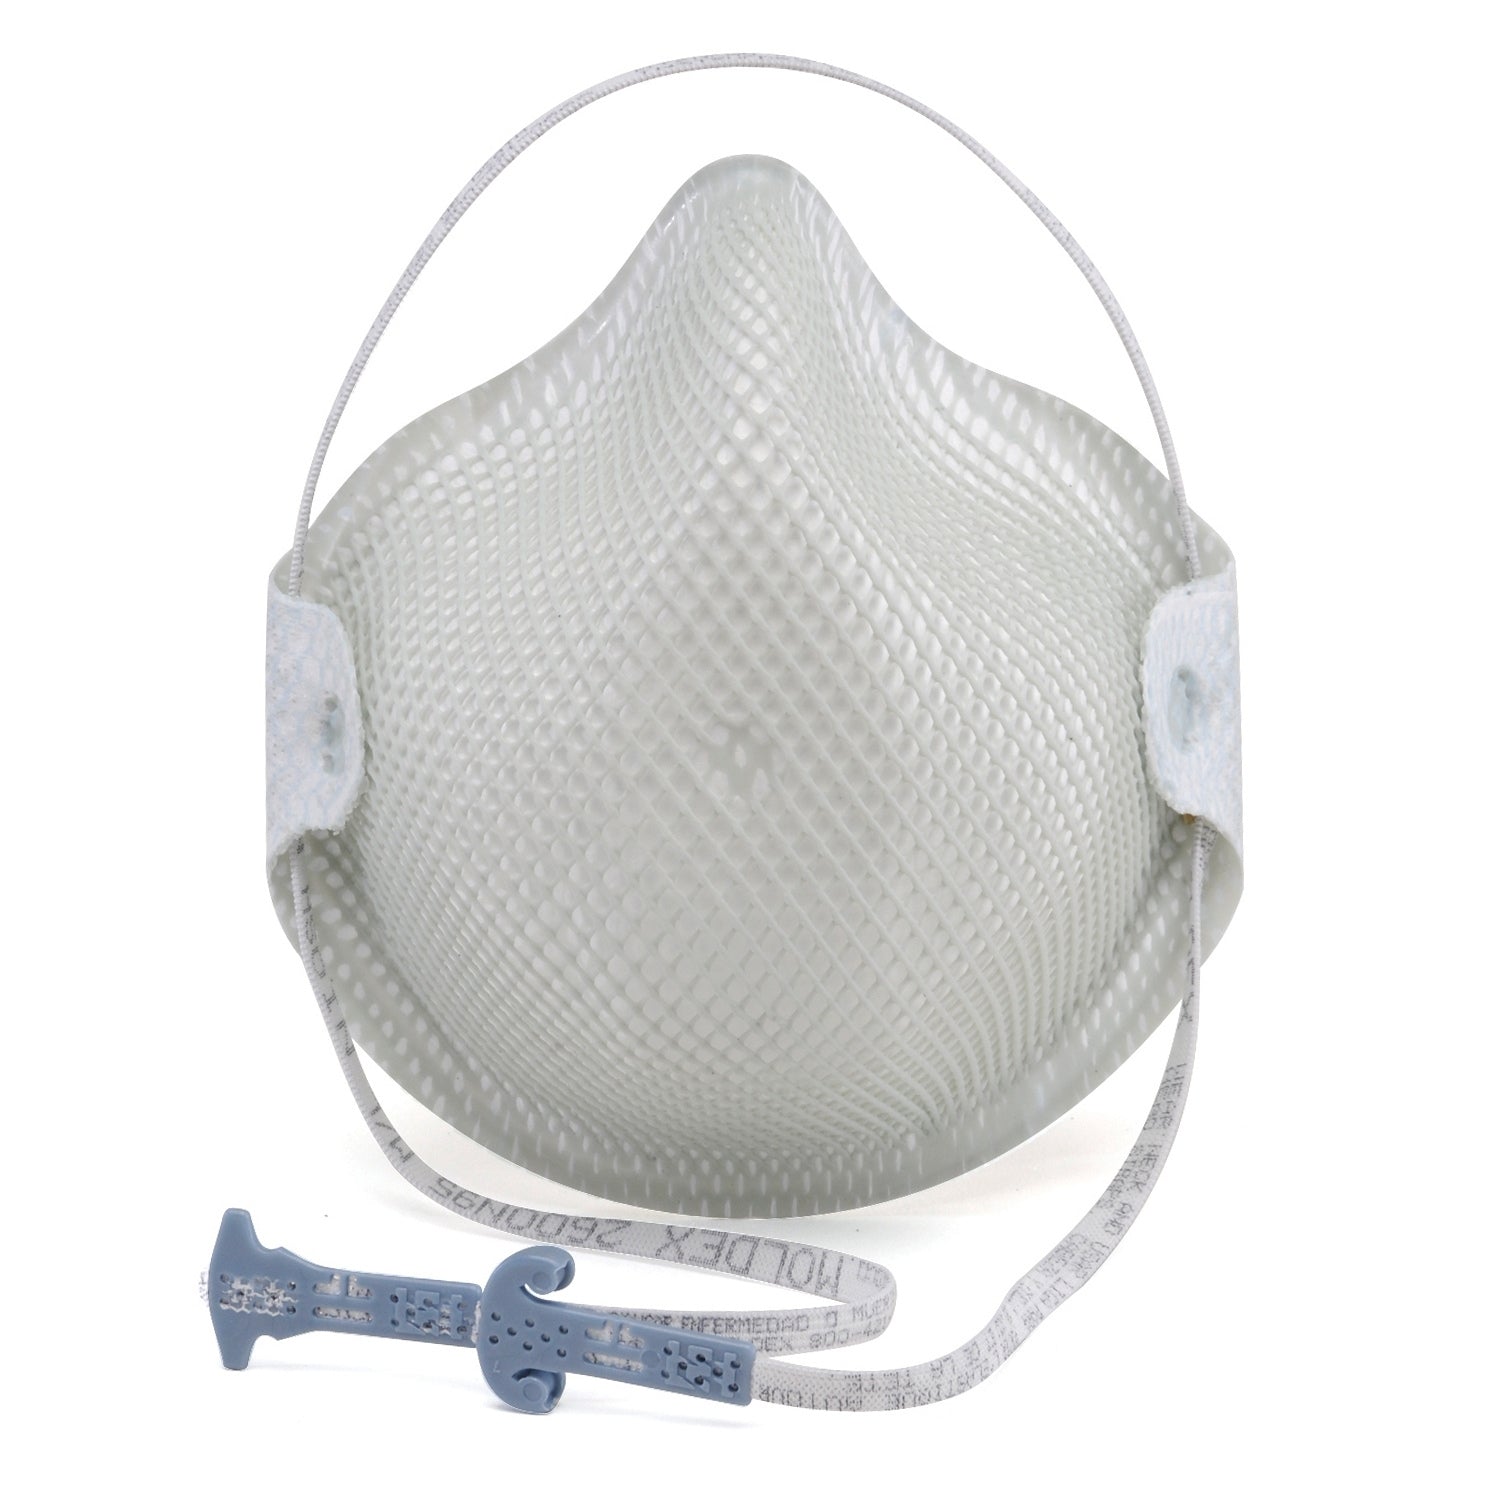 MOLDEX 2600N95 - Particulate Respirators With Handy Strap - 15/BOX